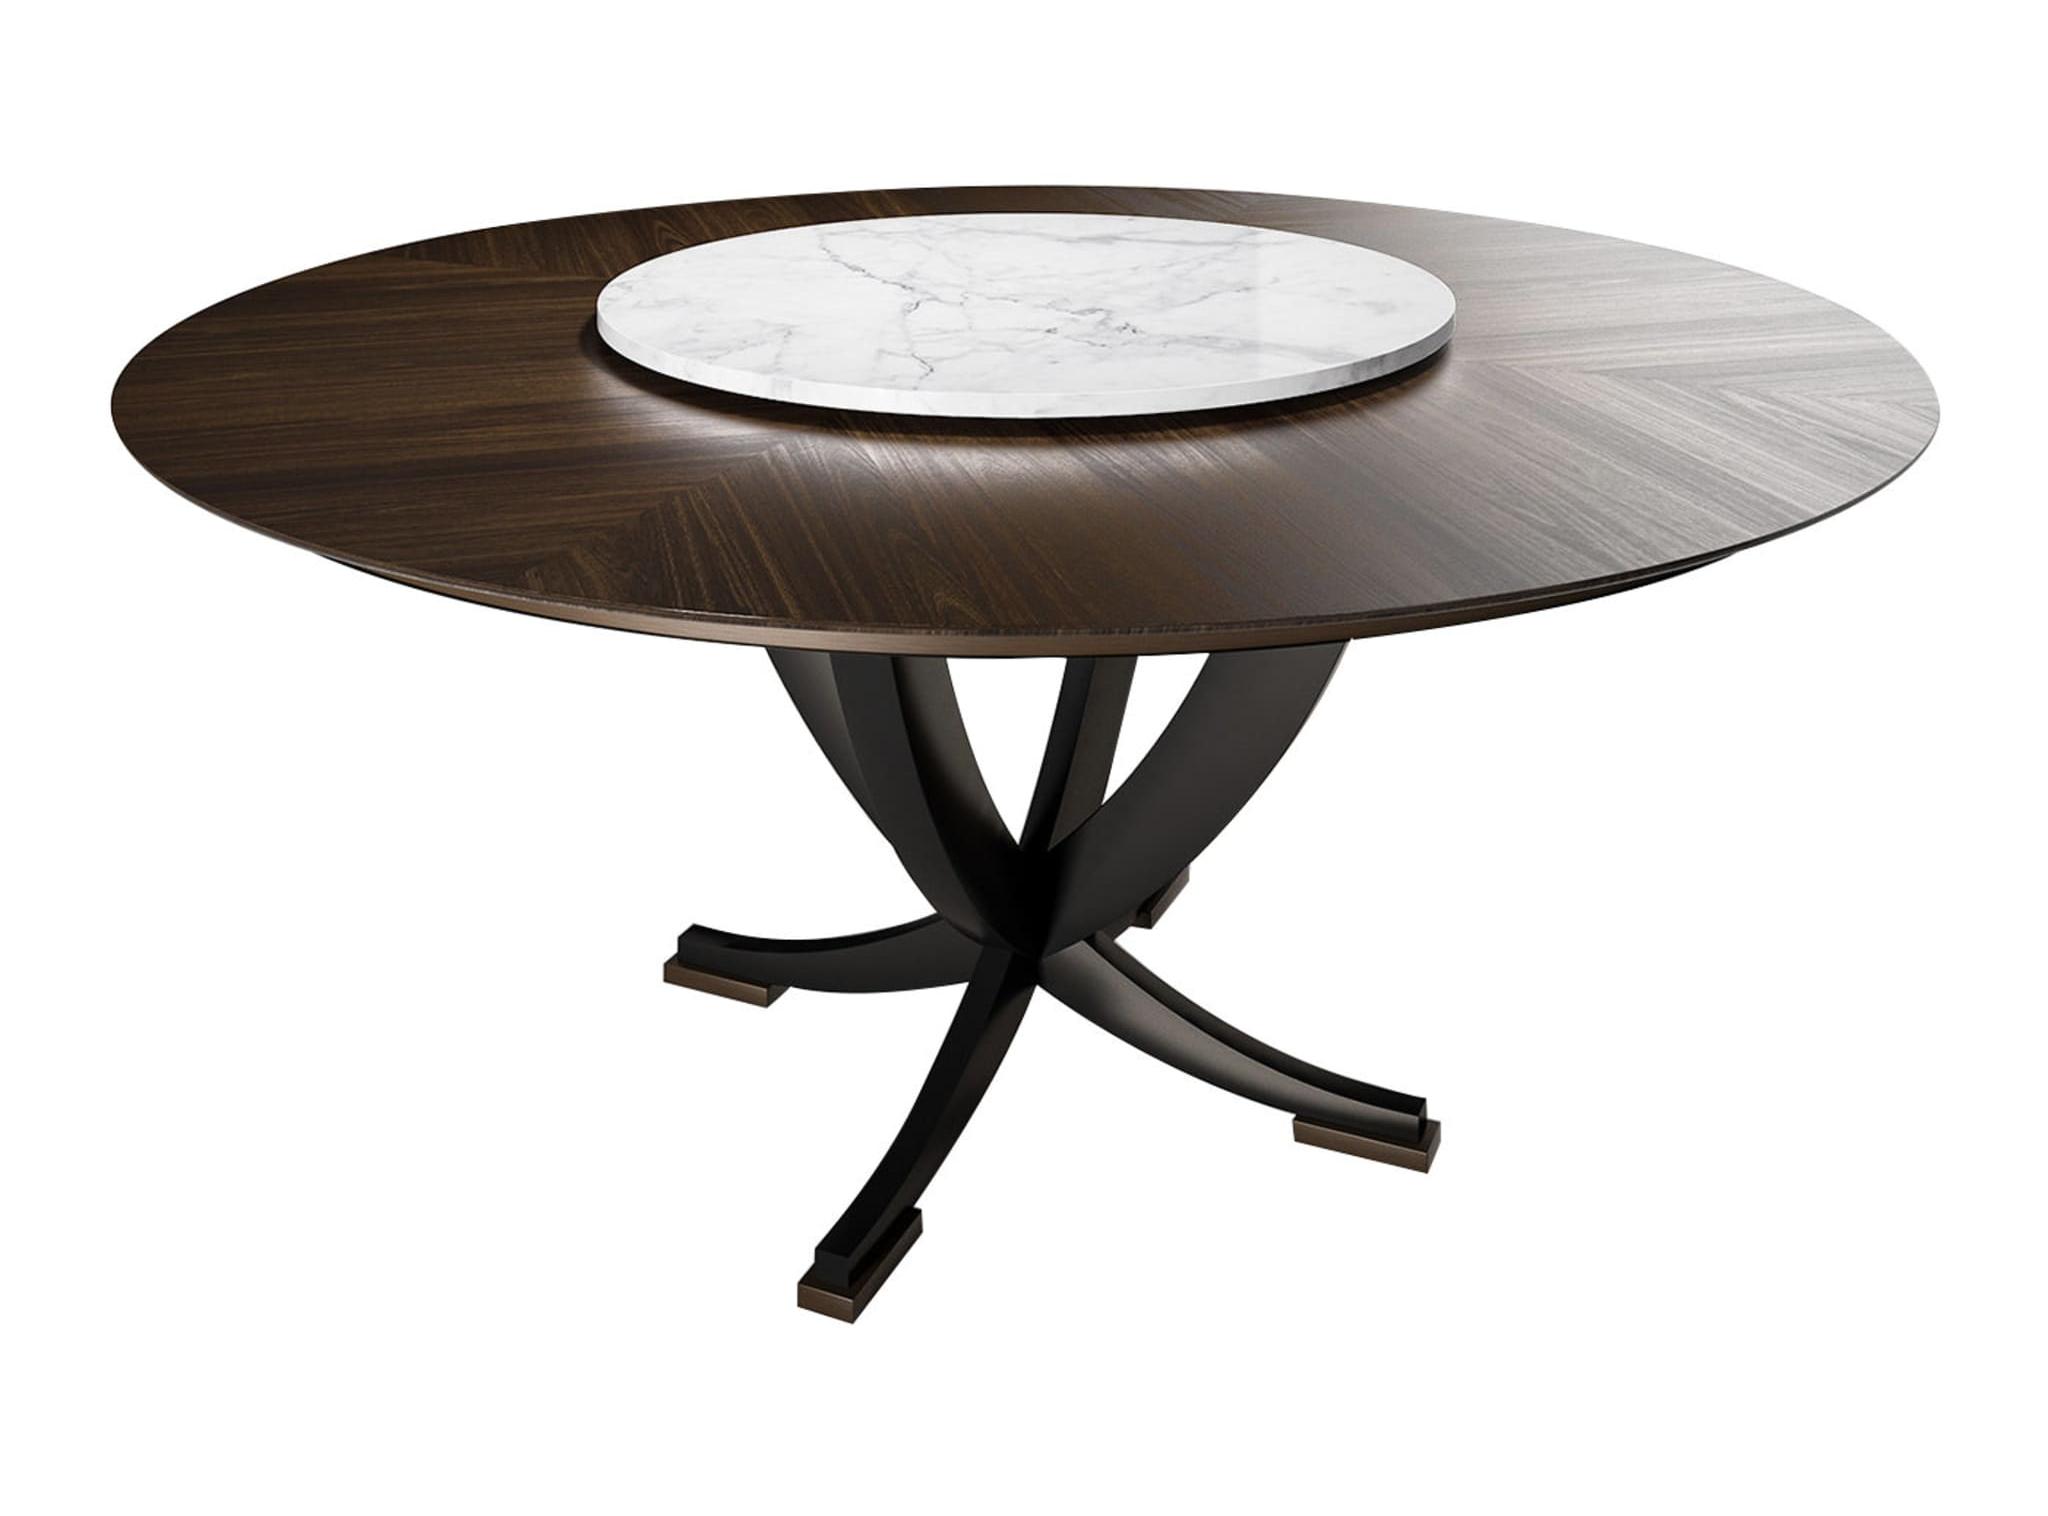 Exquisite Wood and Marble Circular Dining Table